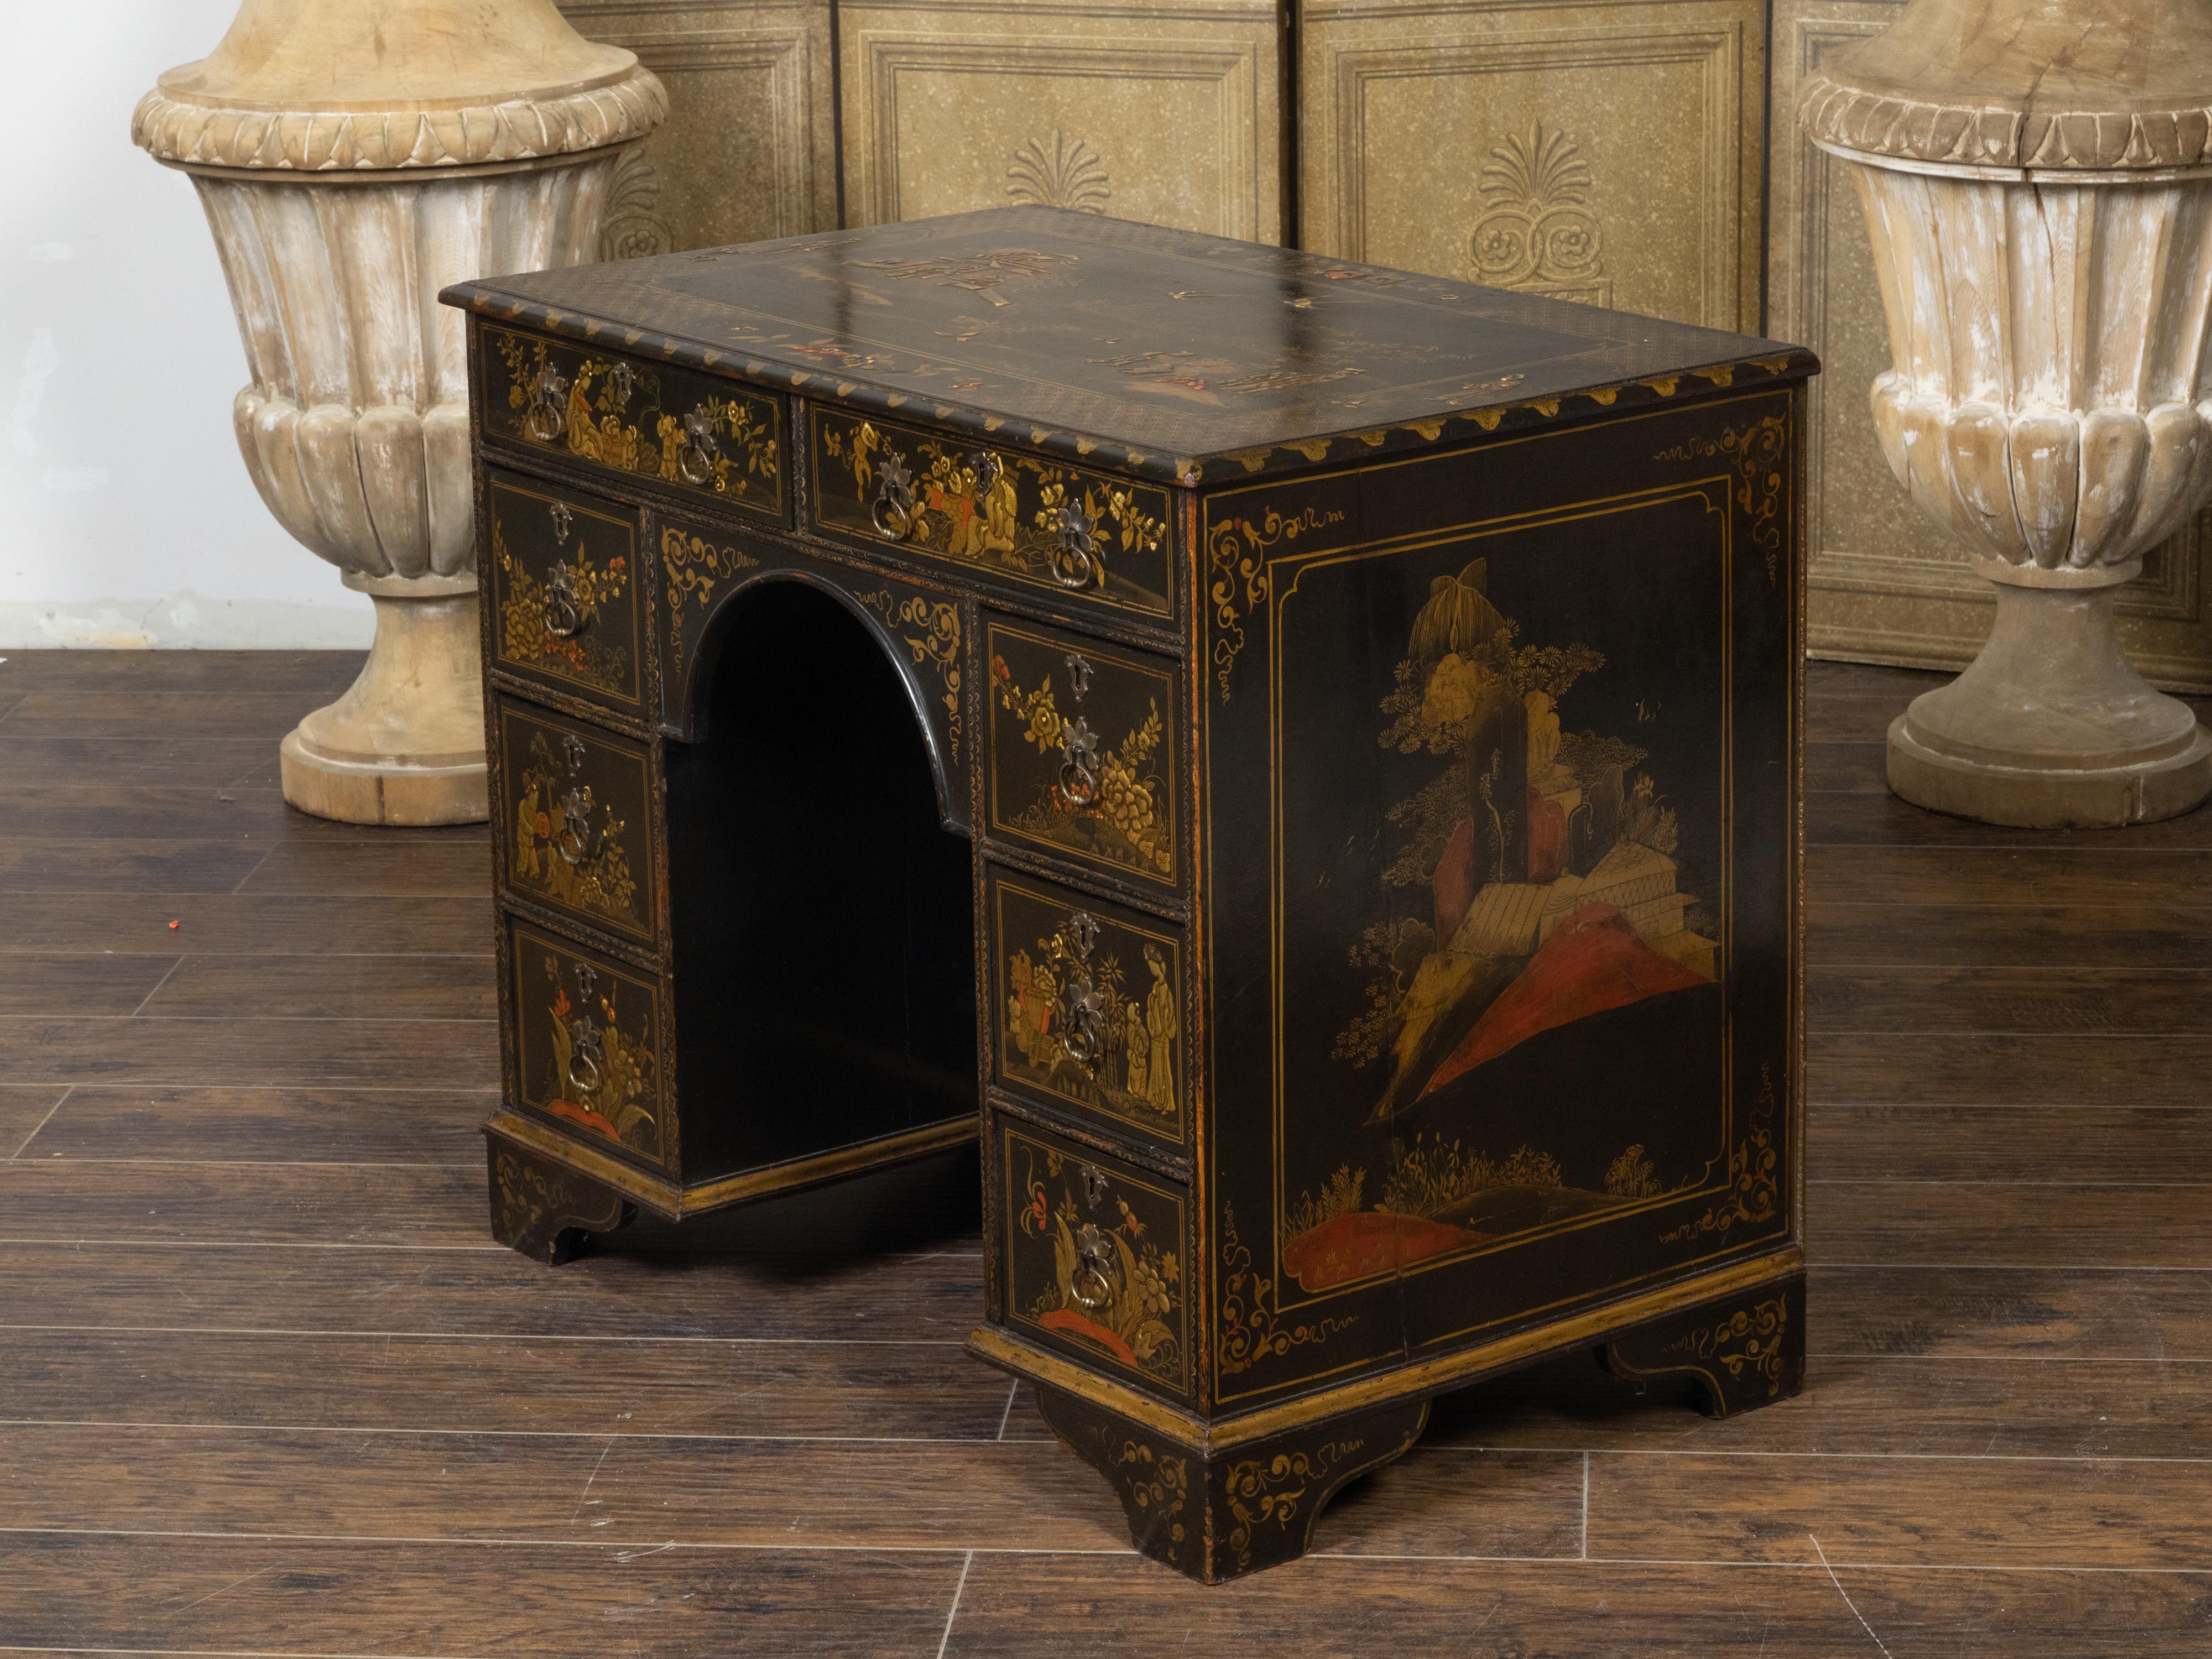 English 19th Century Japanned Desk with Black and Gold Chinoiserie Décor In Good Condition For Sale In Atlanta, GA